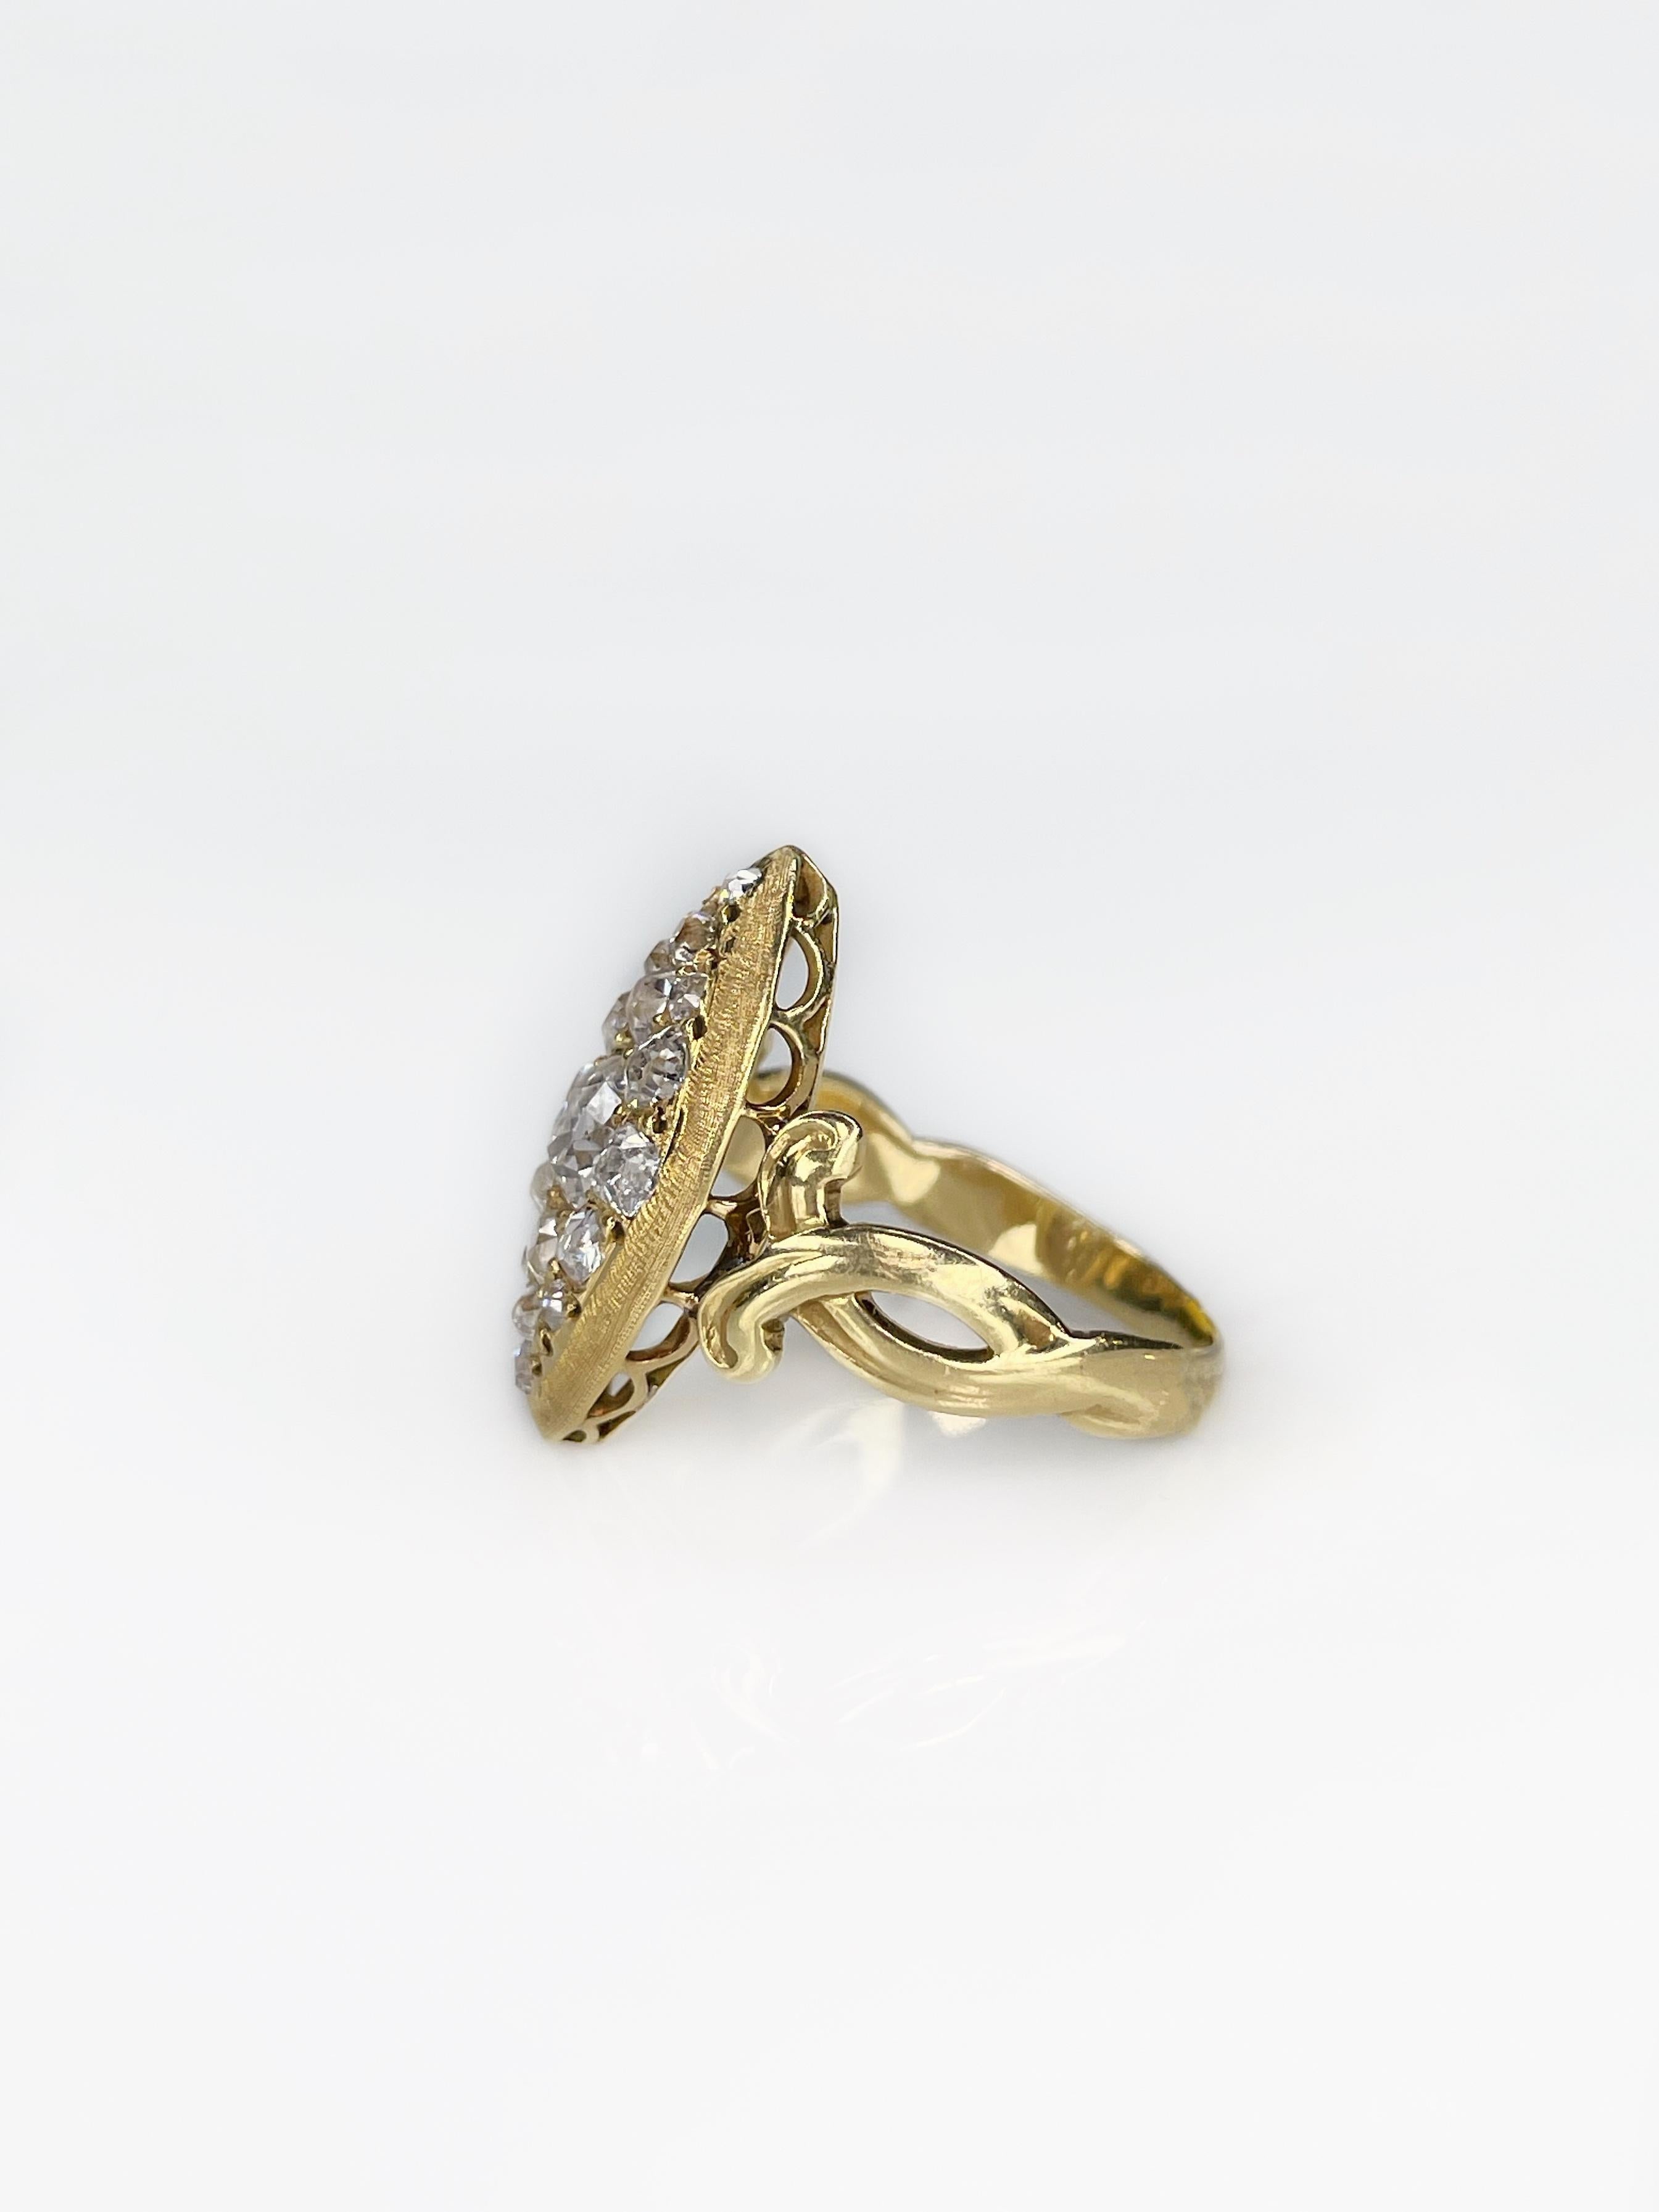 A delightful Early Victorian period navette ring in 18 karat yellow gold. It is composed of 17 old mine cut diamonds, which in total weight ~0,70ct. The colour of gems is RW-W and clarity – SI.

The edge of the head is delicately ornamented, and the